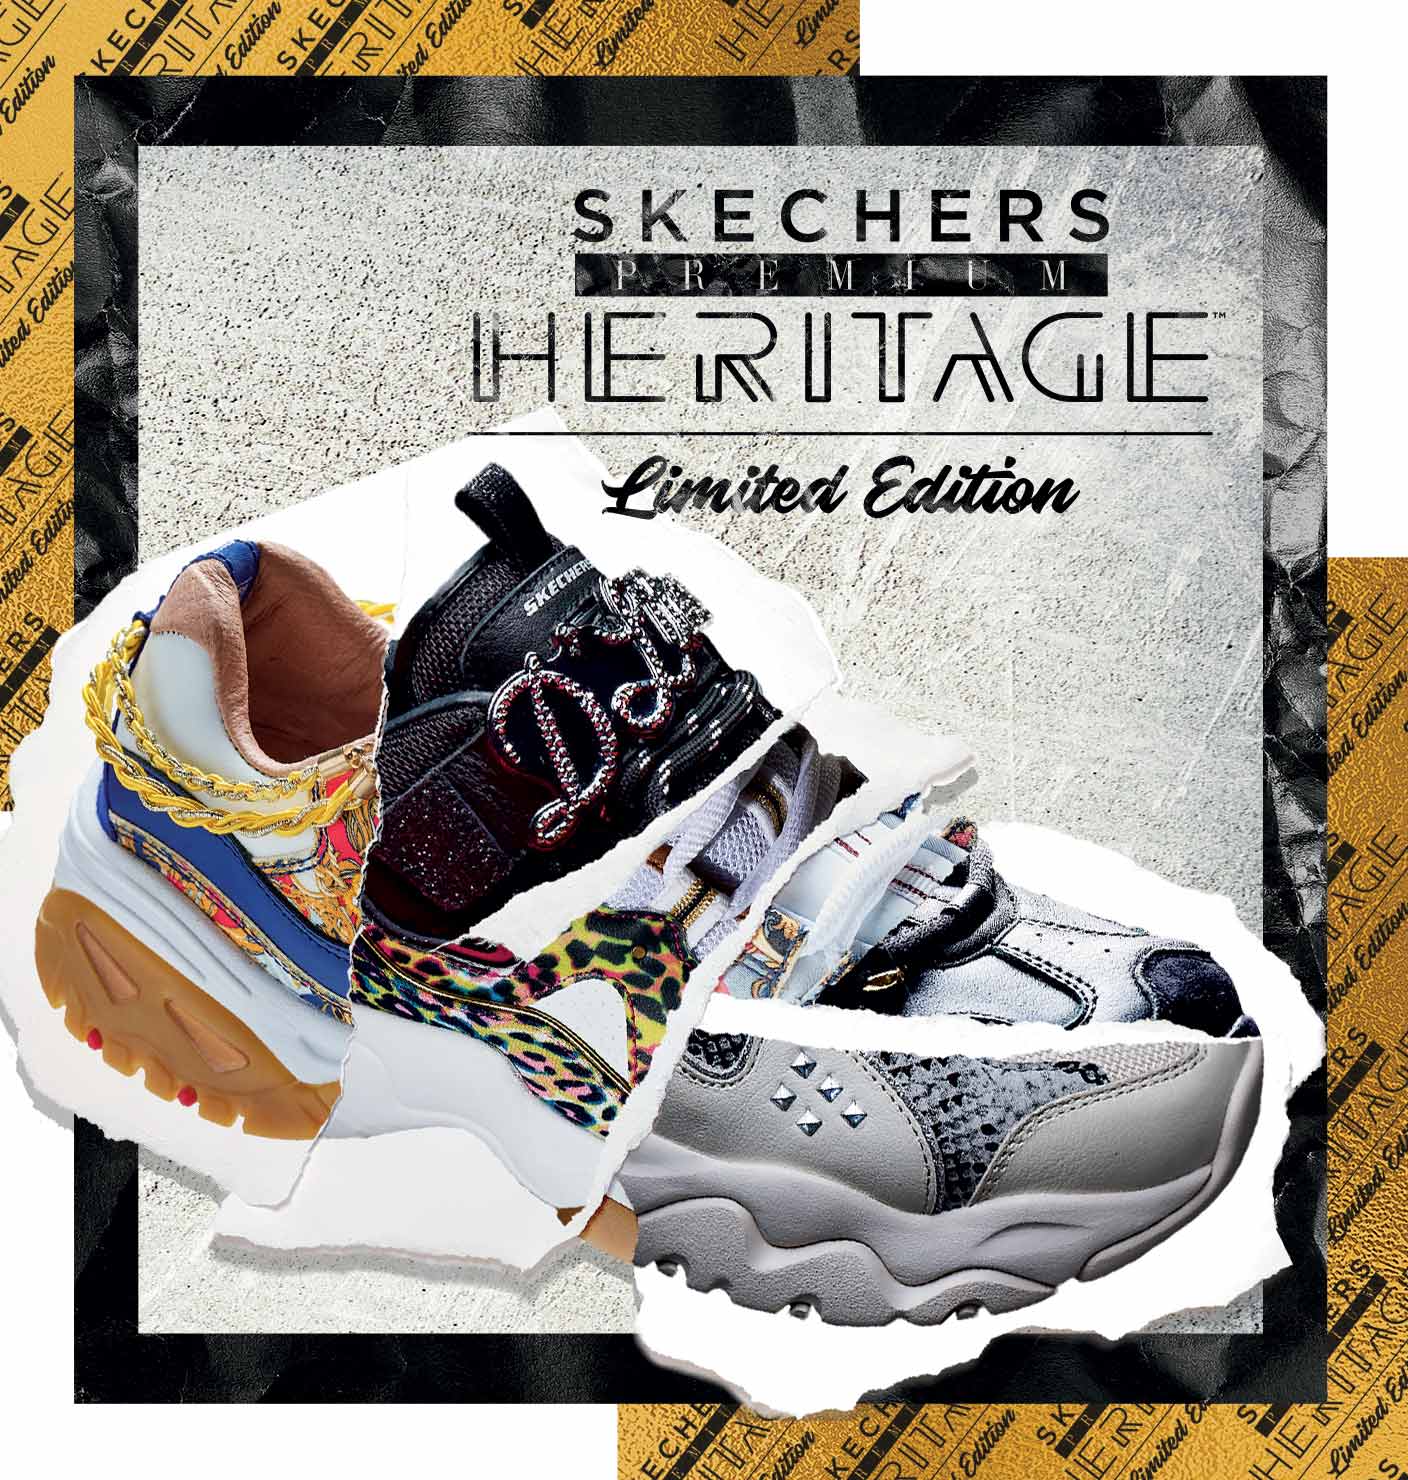 skechers heritage limited edition Shop 